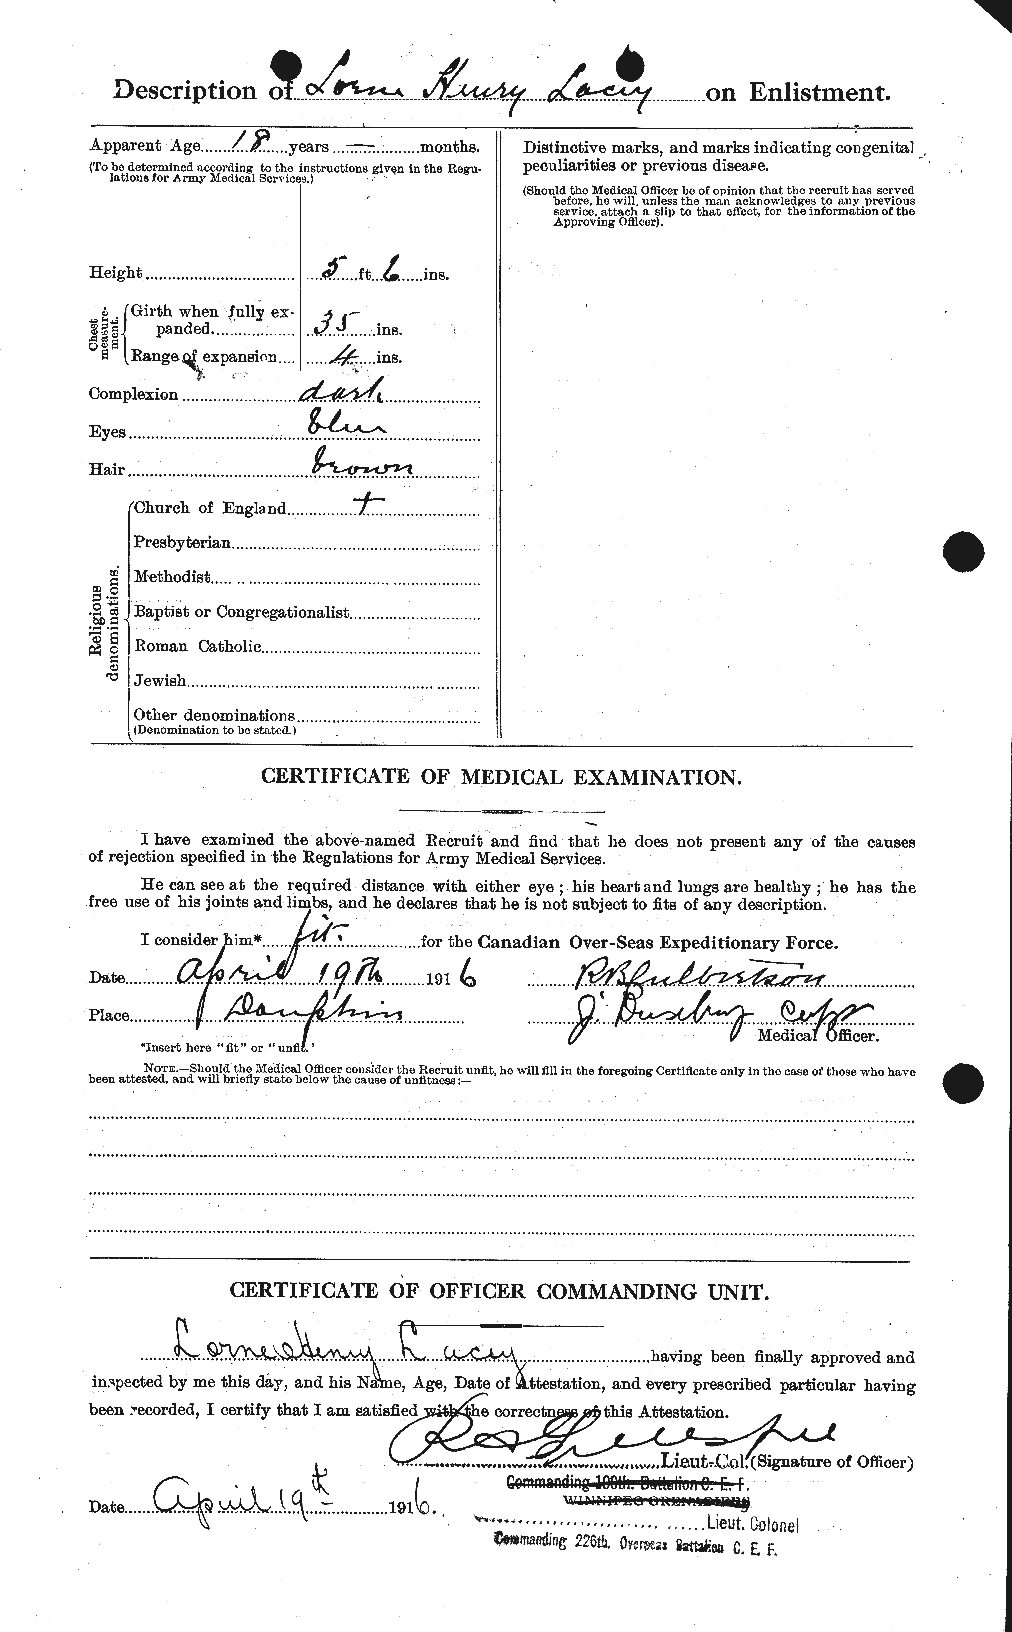 Personnel Records of the First World War - CEF 444527b